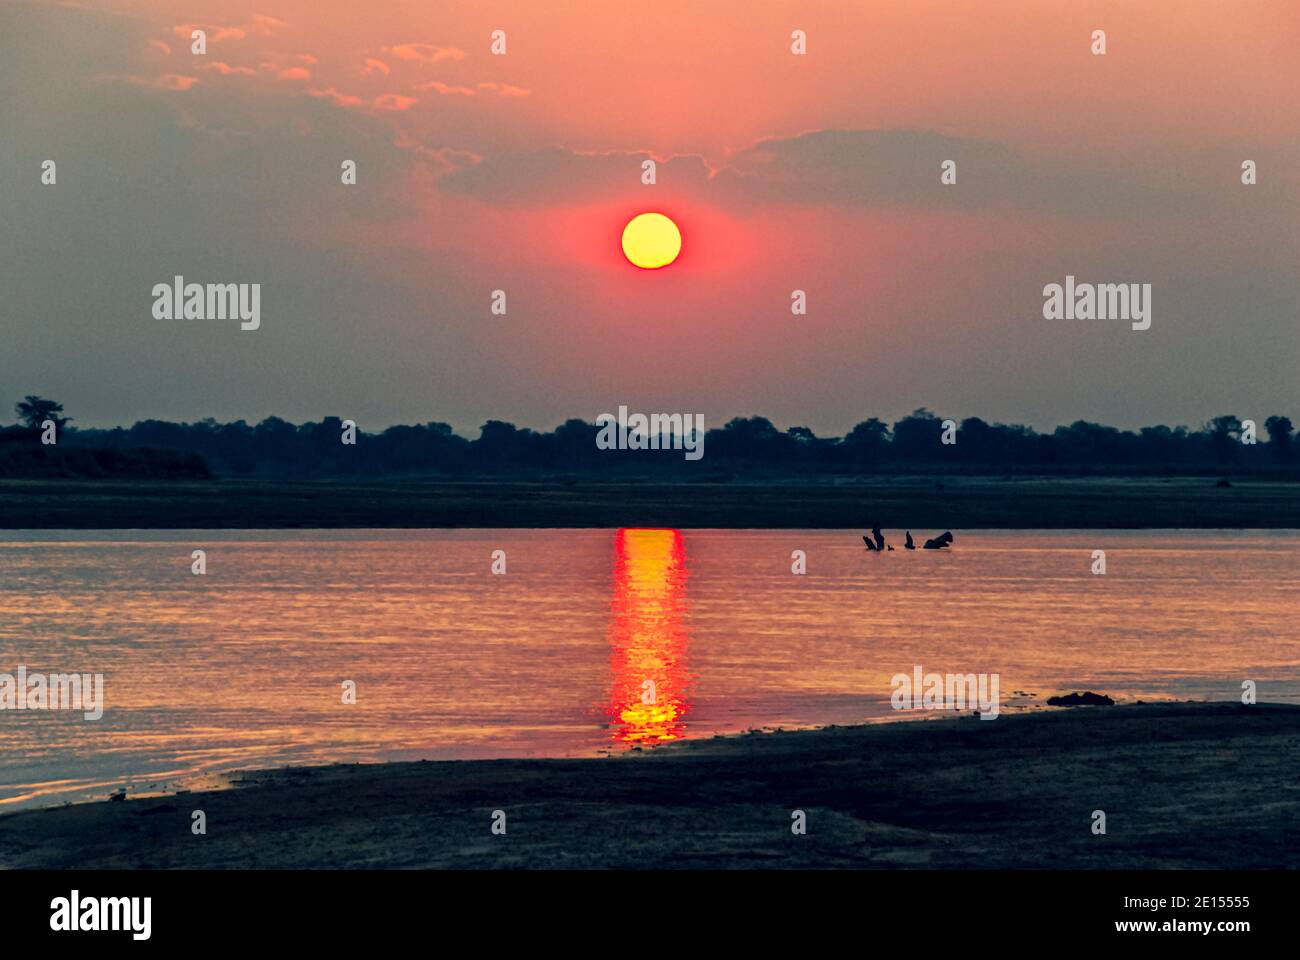 Sunsetting by river in South Luangwa National Park, Zambia, Africa Stock Photo